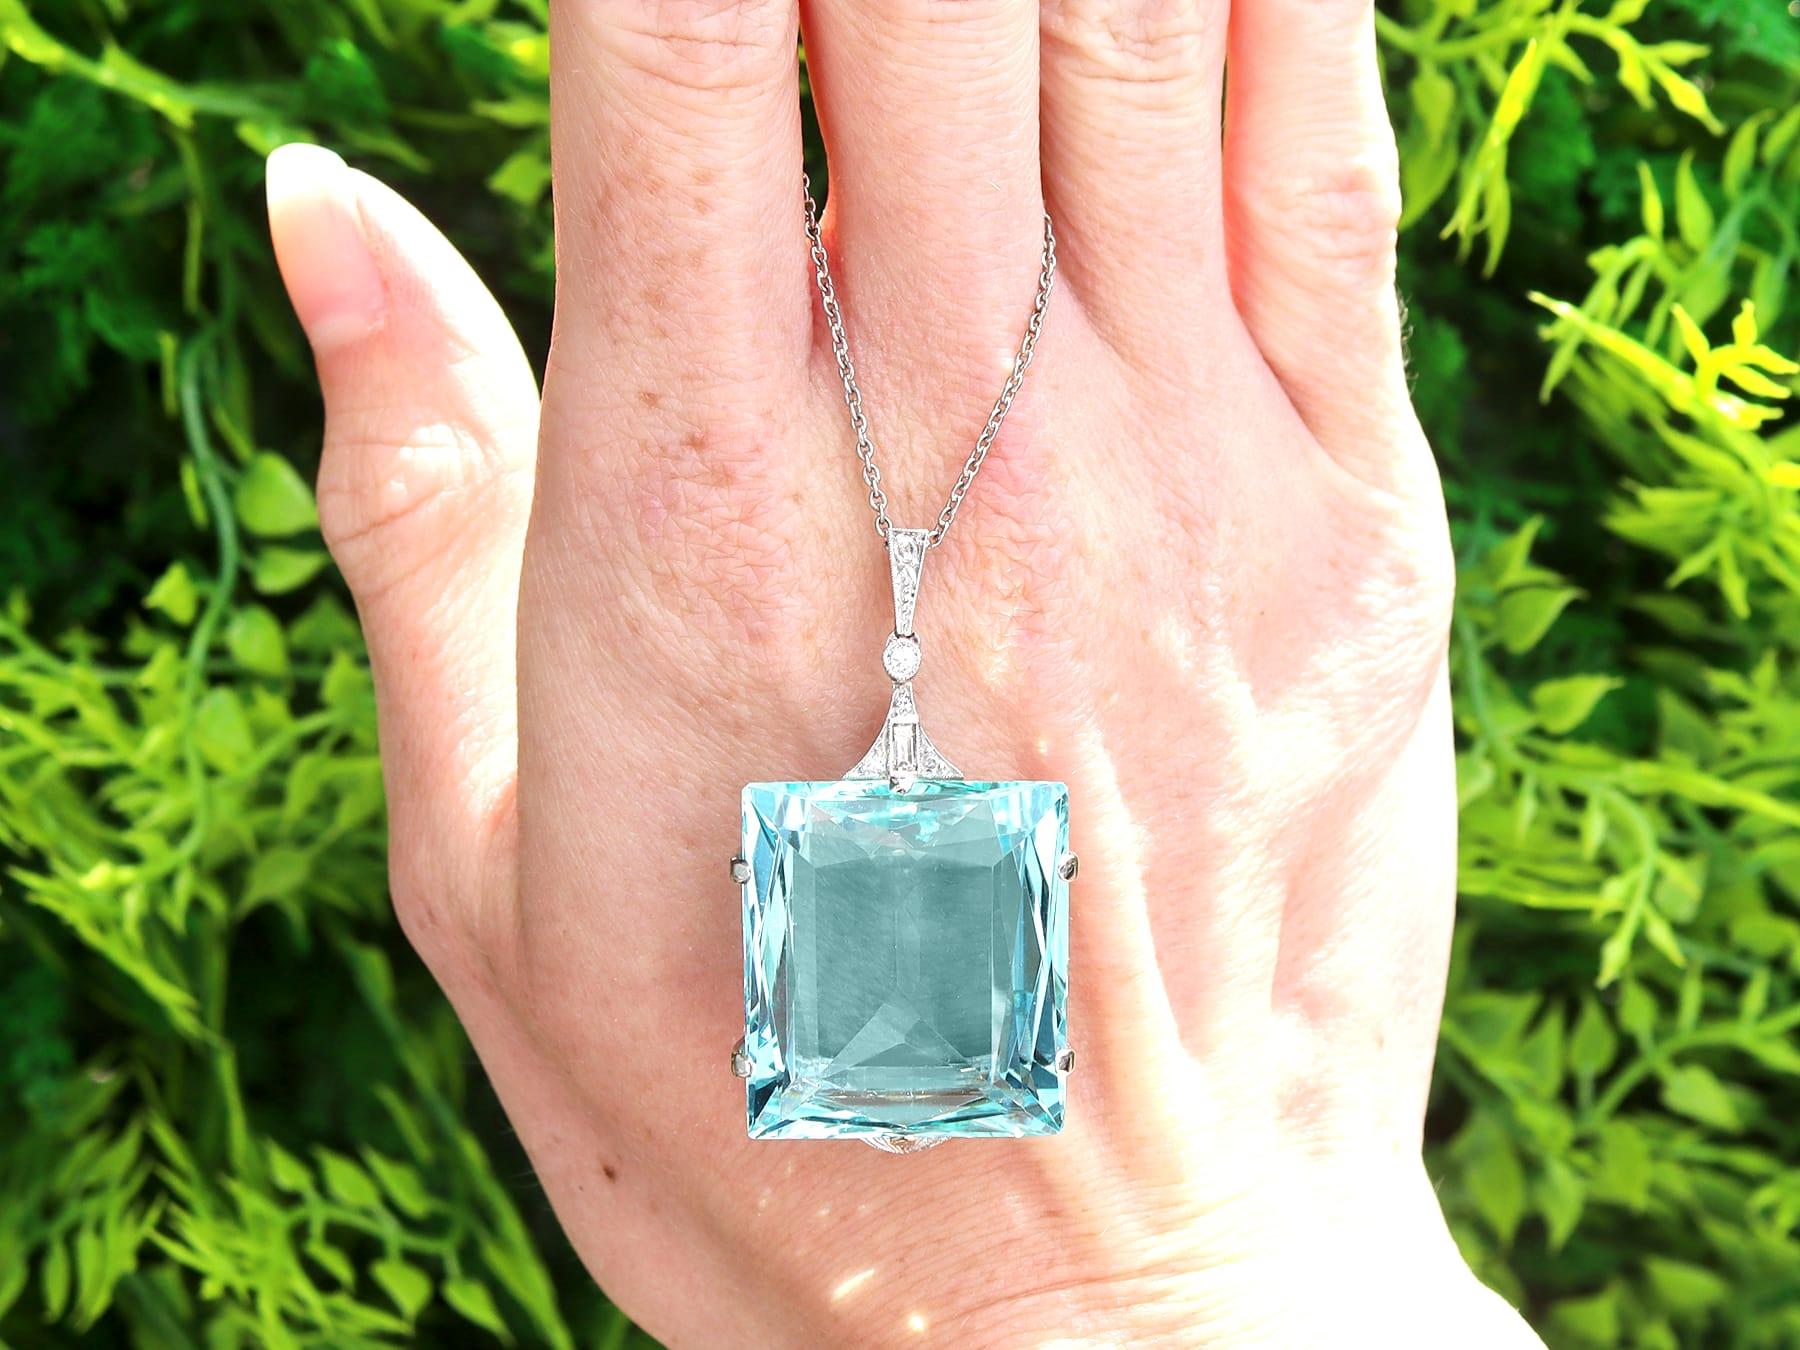 A stunning, fine and impressive antique 42.88 carat aquamarine and 0.10 carat diamond, 9 karat white gold pendant; part of our diverse vintage jewellery and estate jewelry collections.

This magnificent, fine and impressive antique aquamarine